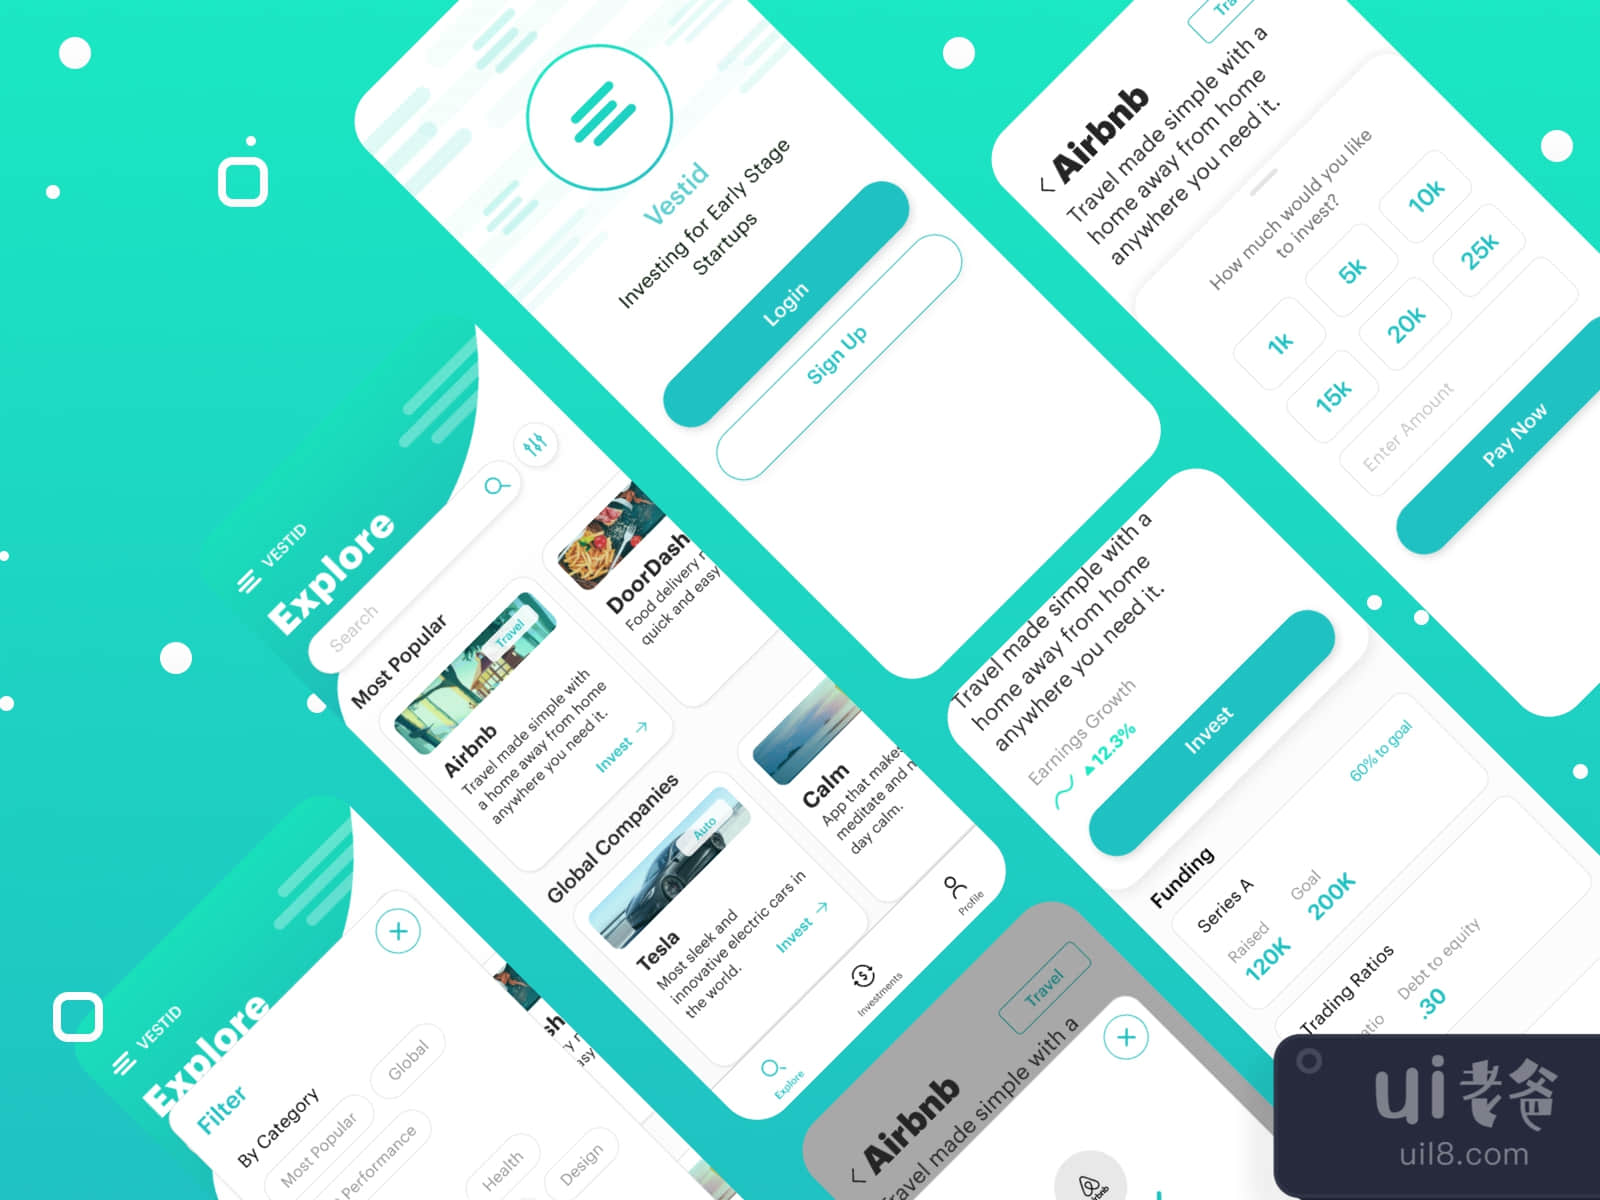 Investment App UI Kit for Figma and Adobe XD No 4